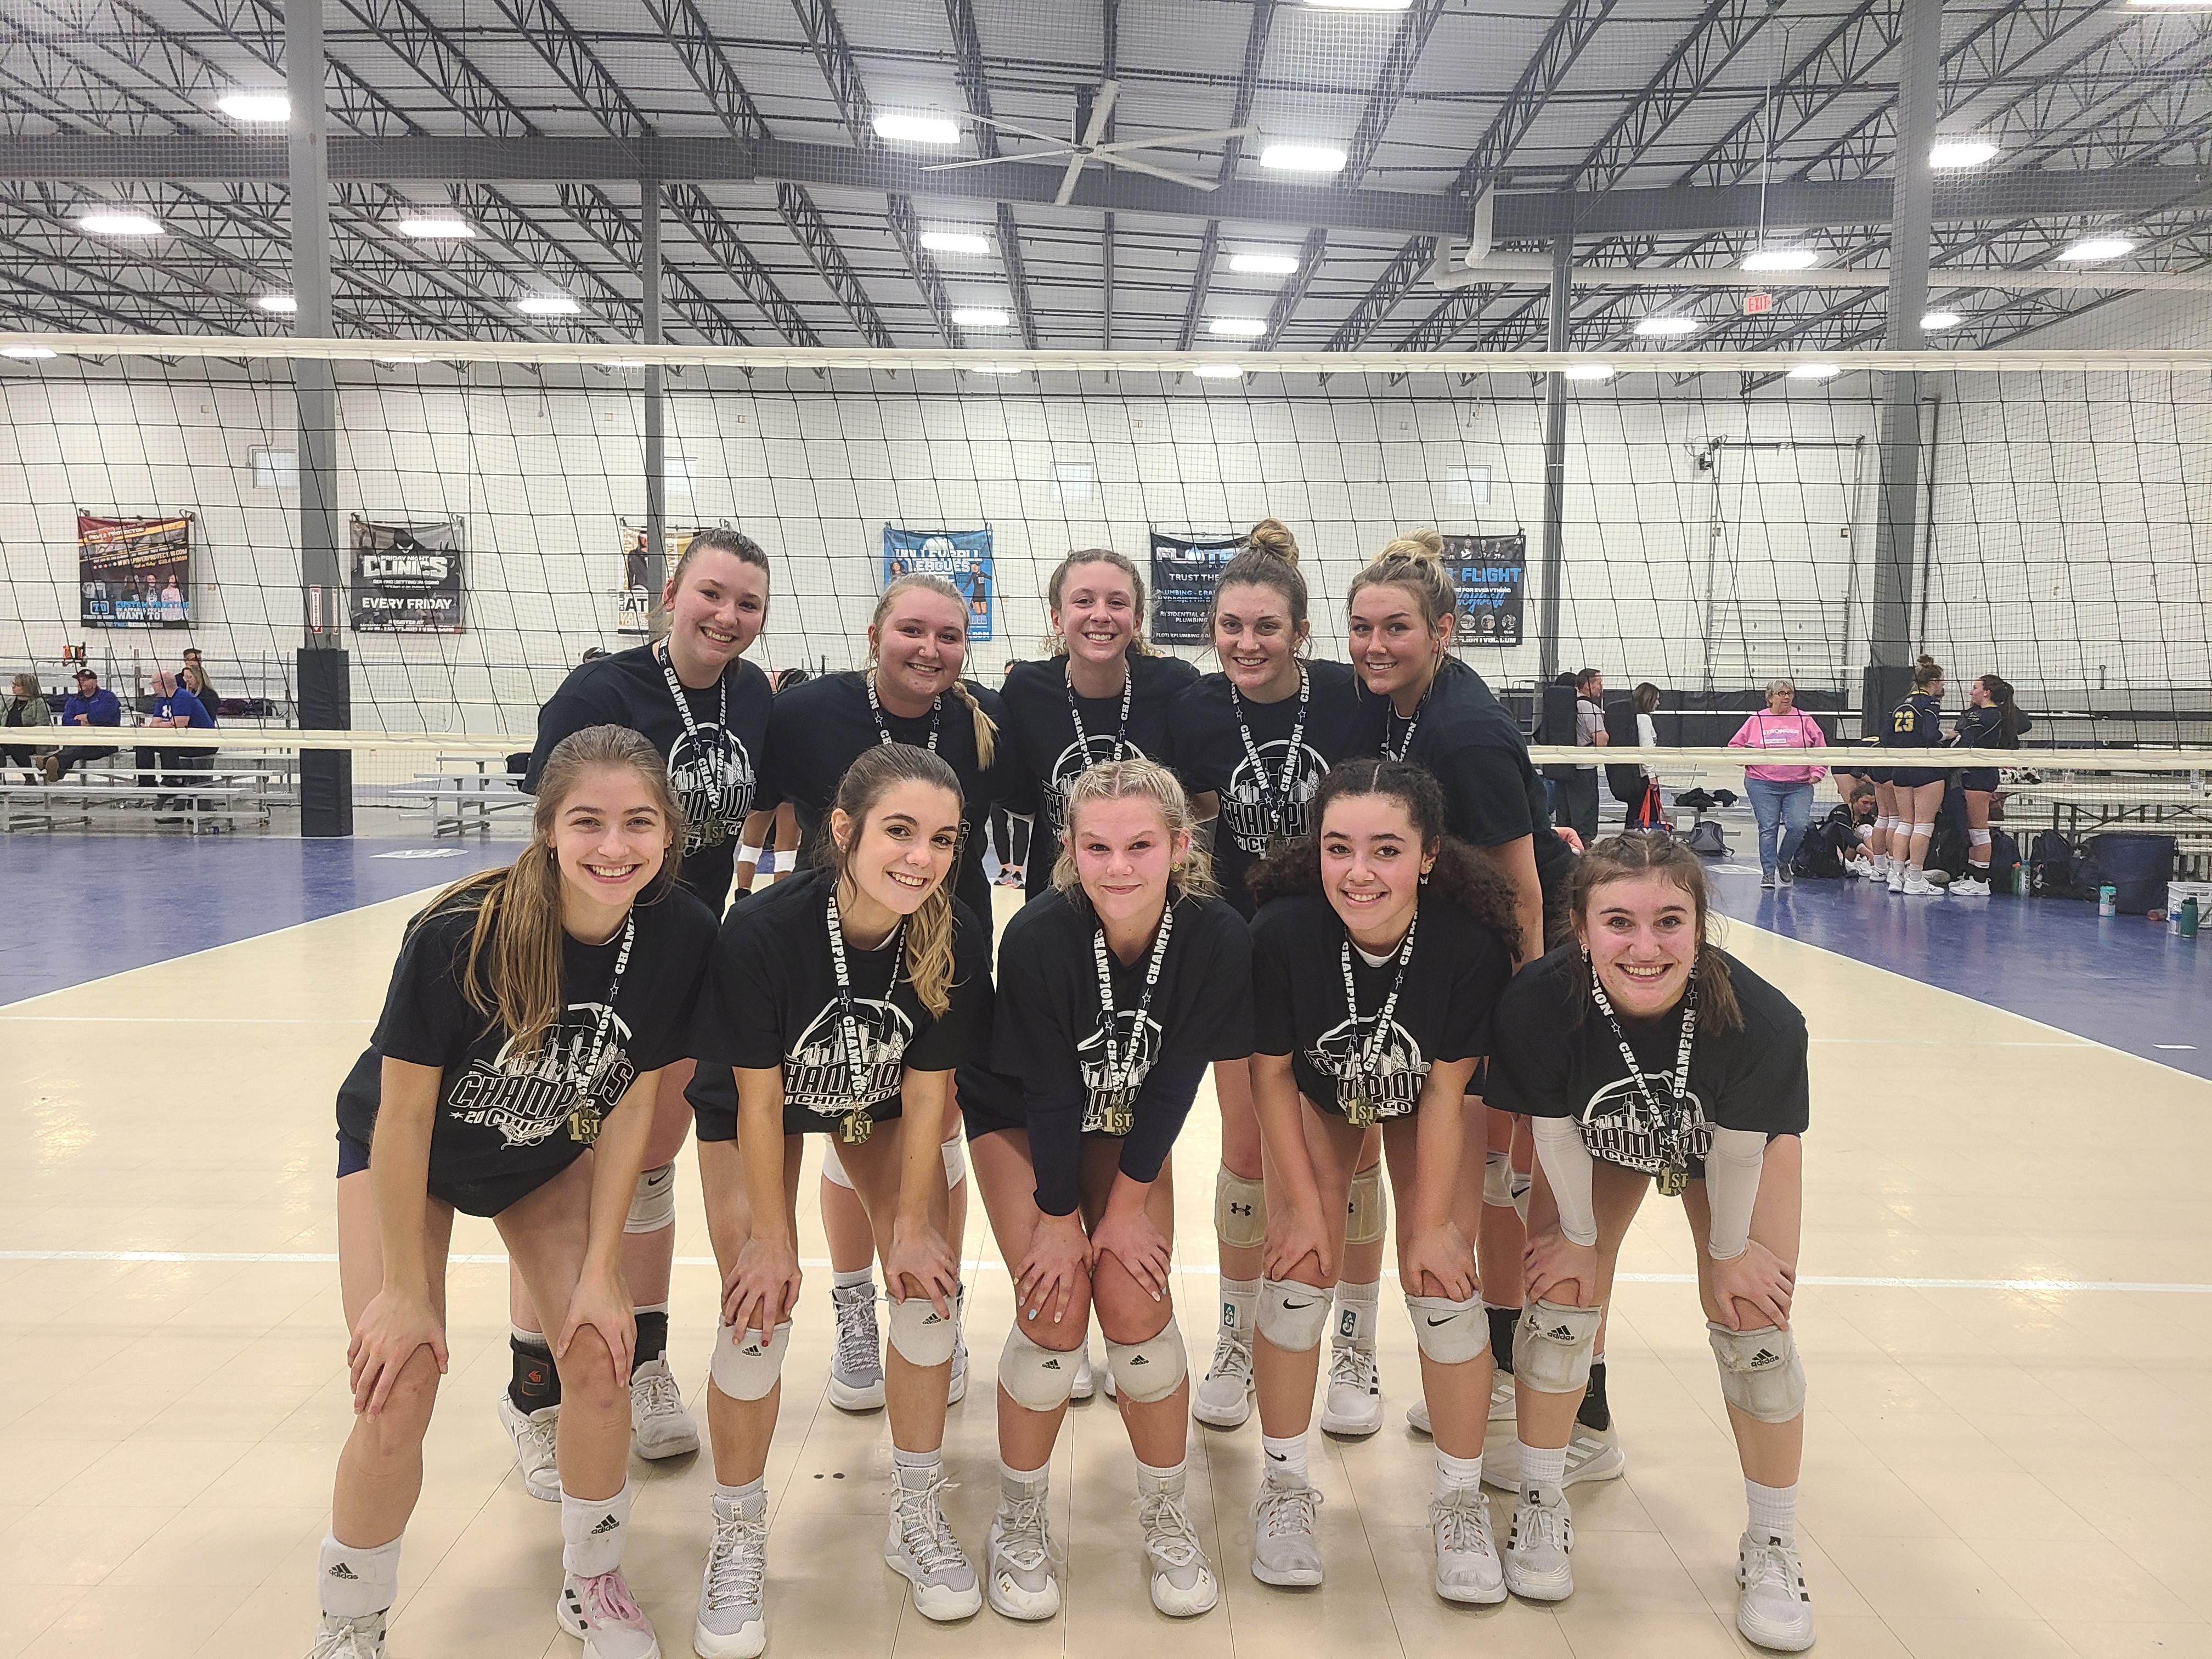 Experience top-notch volleyball training at Belusa United Volleyball Club. Our experienced coaches provide comprehensive instruction and skill development to help players excel on the court, whether they're beginners or aspiring professionals.